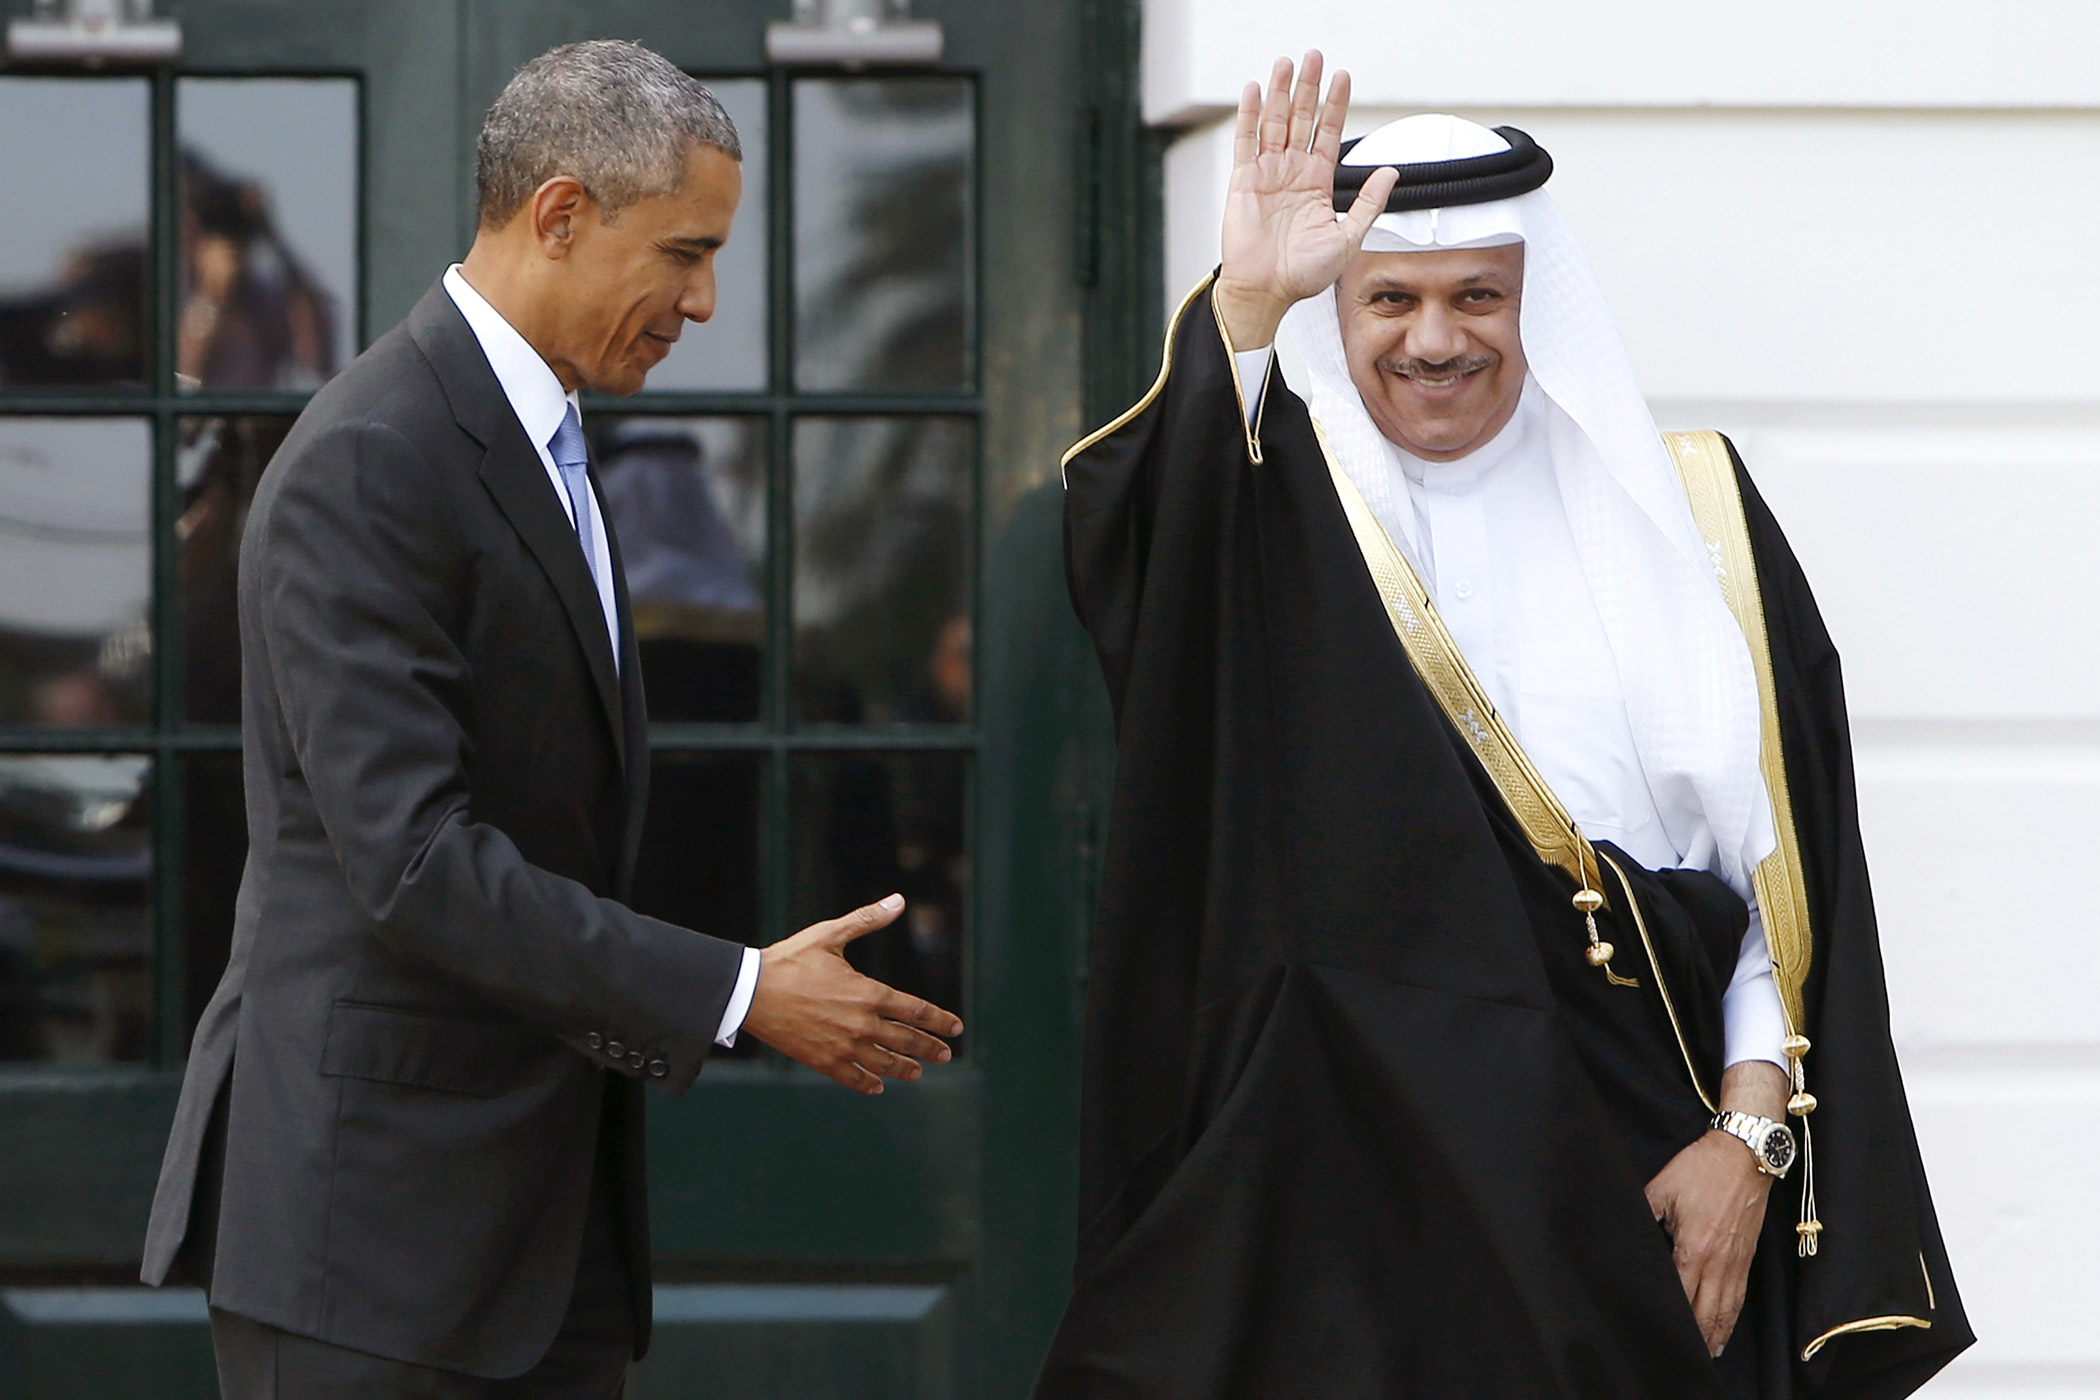 U.S. President Barack Obama welcomes Secretary General of the Gulf Cooperation Council Abdul Latif bin Rashid Al Zayani, of Bahrain, while hosting leaders and delegations from the Gulf Cooperation Council countries at the White House in Washington on May 13, 2015.